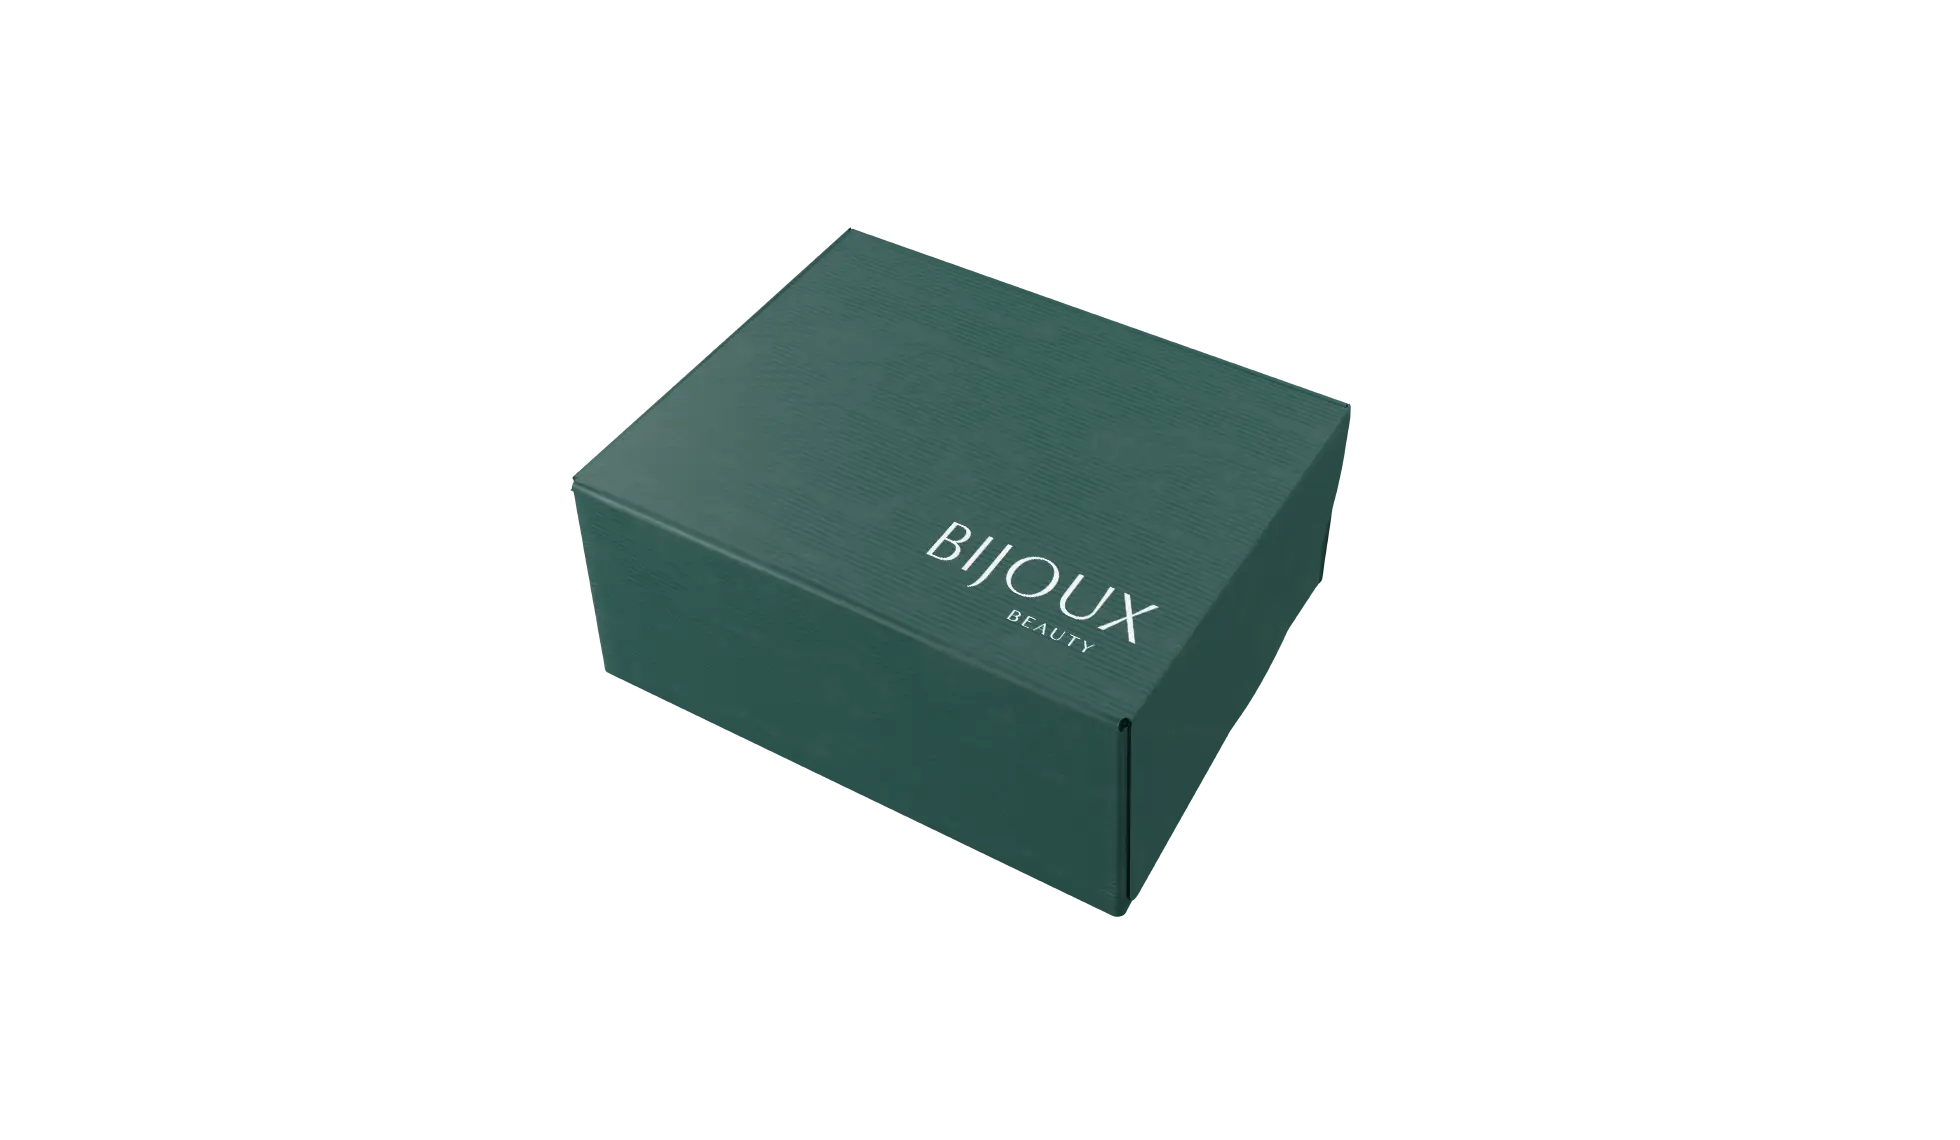 A pine-colored box with a beauty brand called Bijoux Beauty.